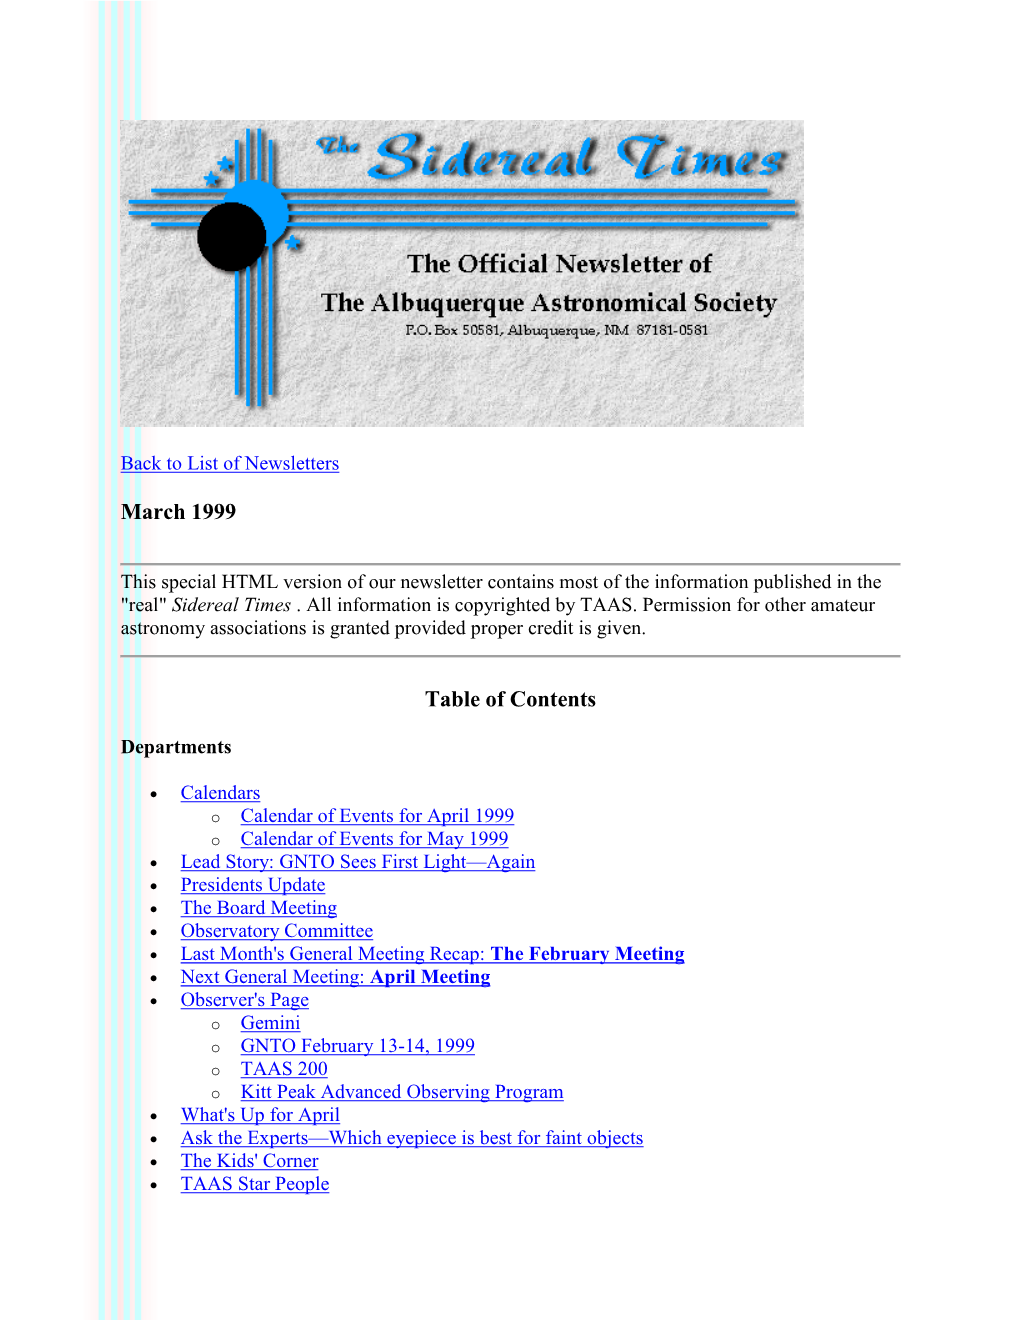 March 1999 the Albuquerque Astronomical Society News Letter